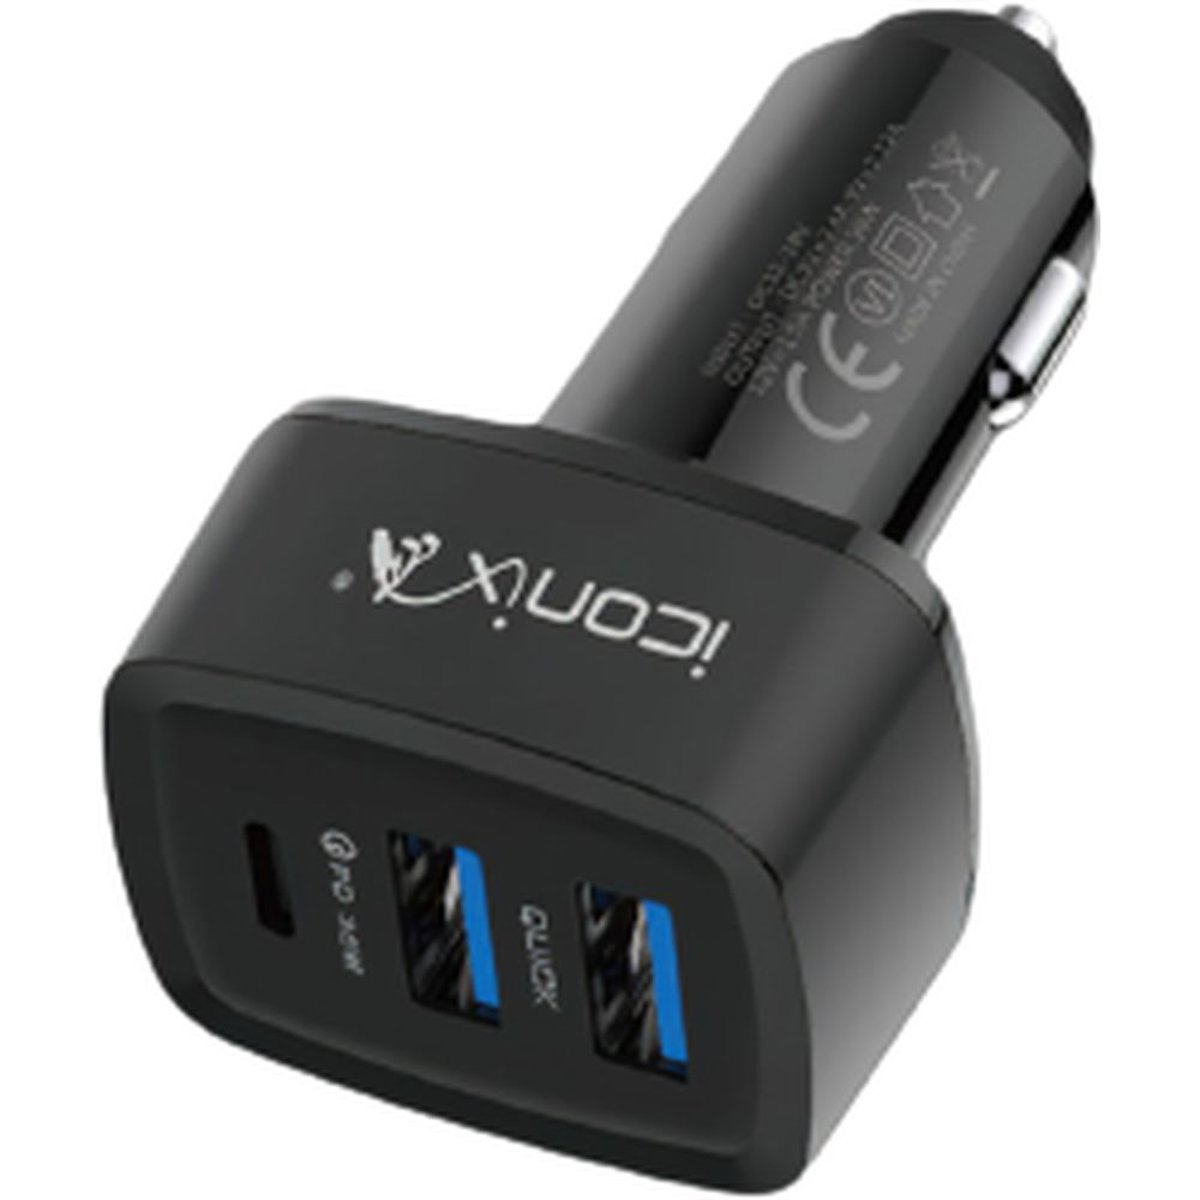 CAR CHARGER FOR USB ANDROID/IOS I CONIX-4.8A 36W IC-CC1715  راسيه شاحن سياره سريع مخرجين عادي ومخرج تايب سي ,Smartphones & Tab Chargers